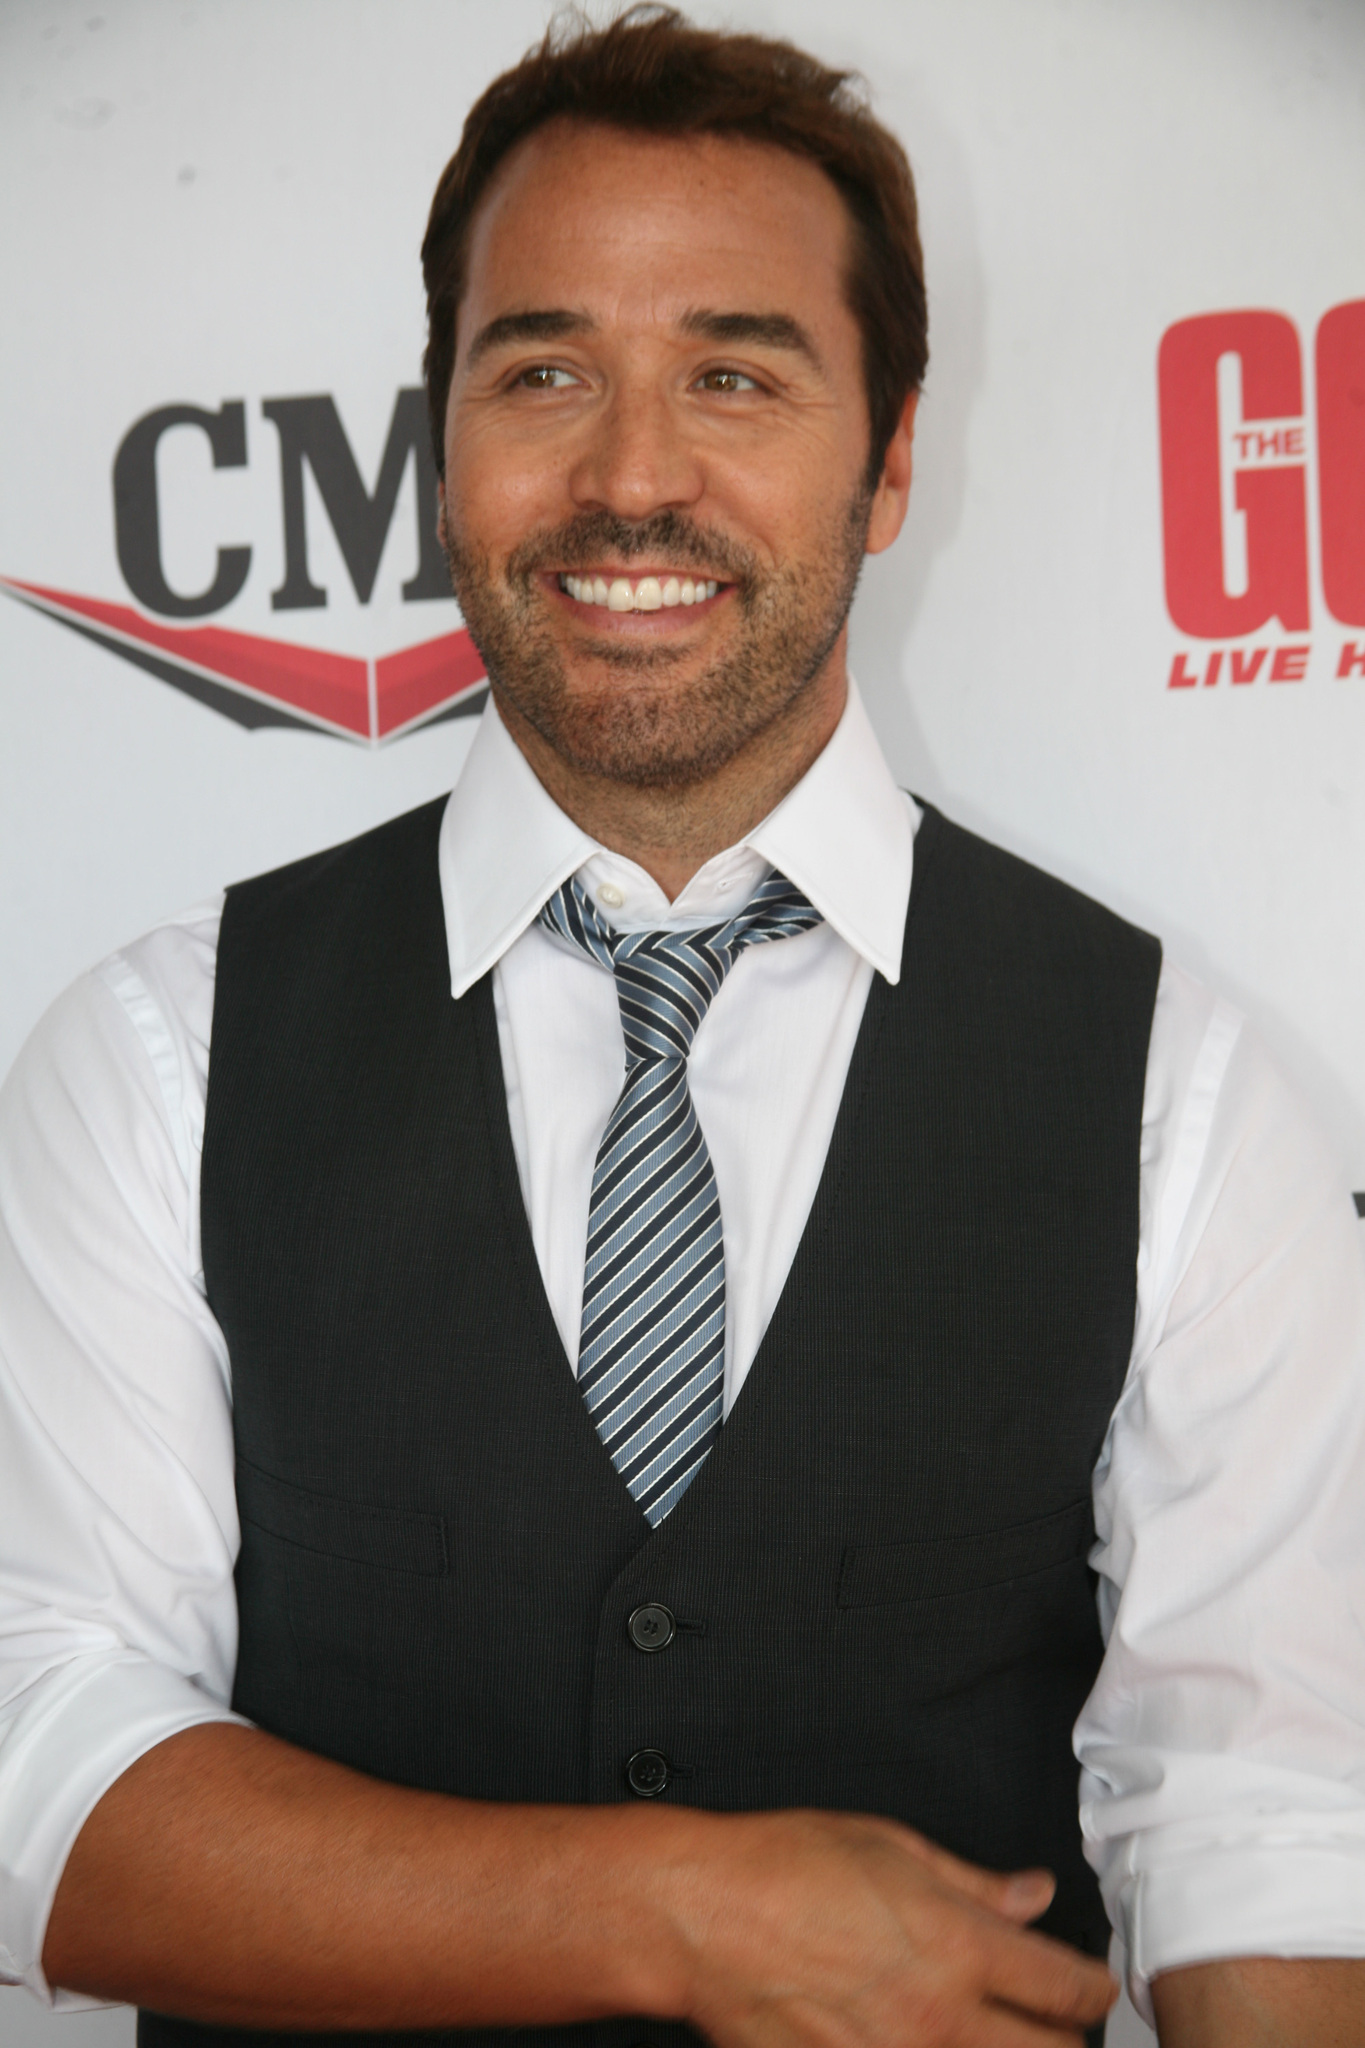 Jeremy Piven at event of The Goods: Live Hard, Sell Hard (2009)